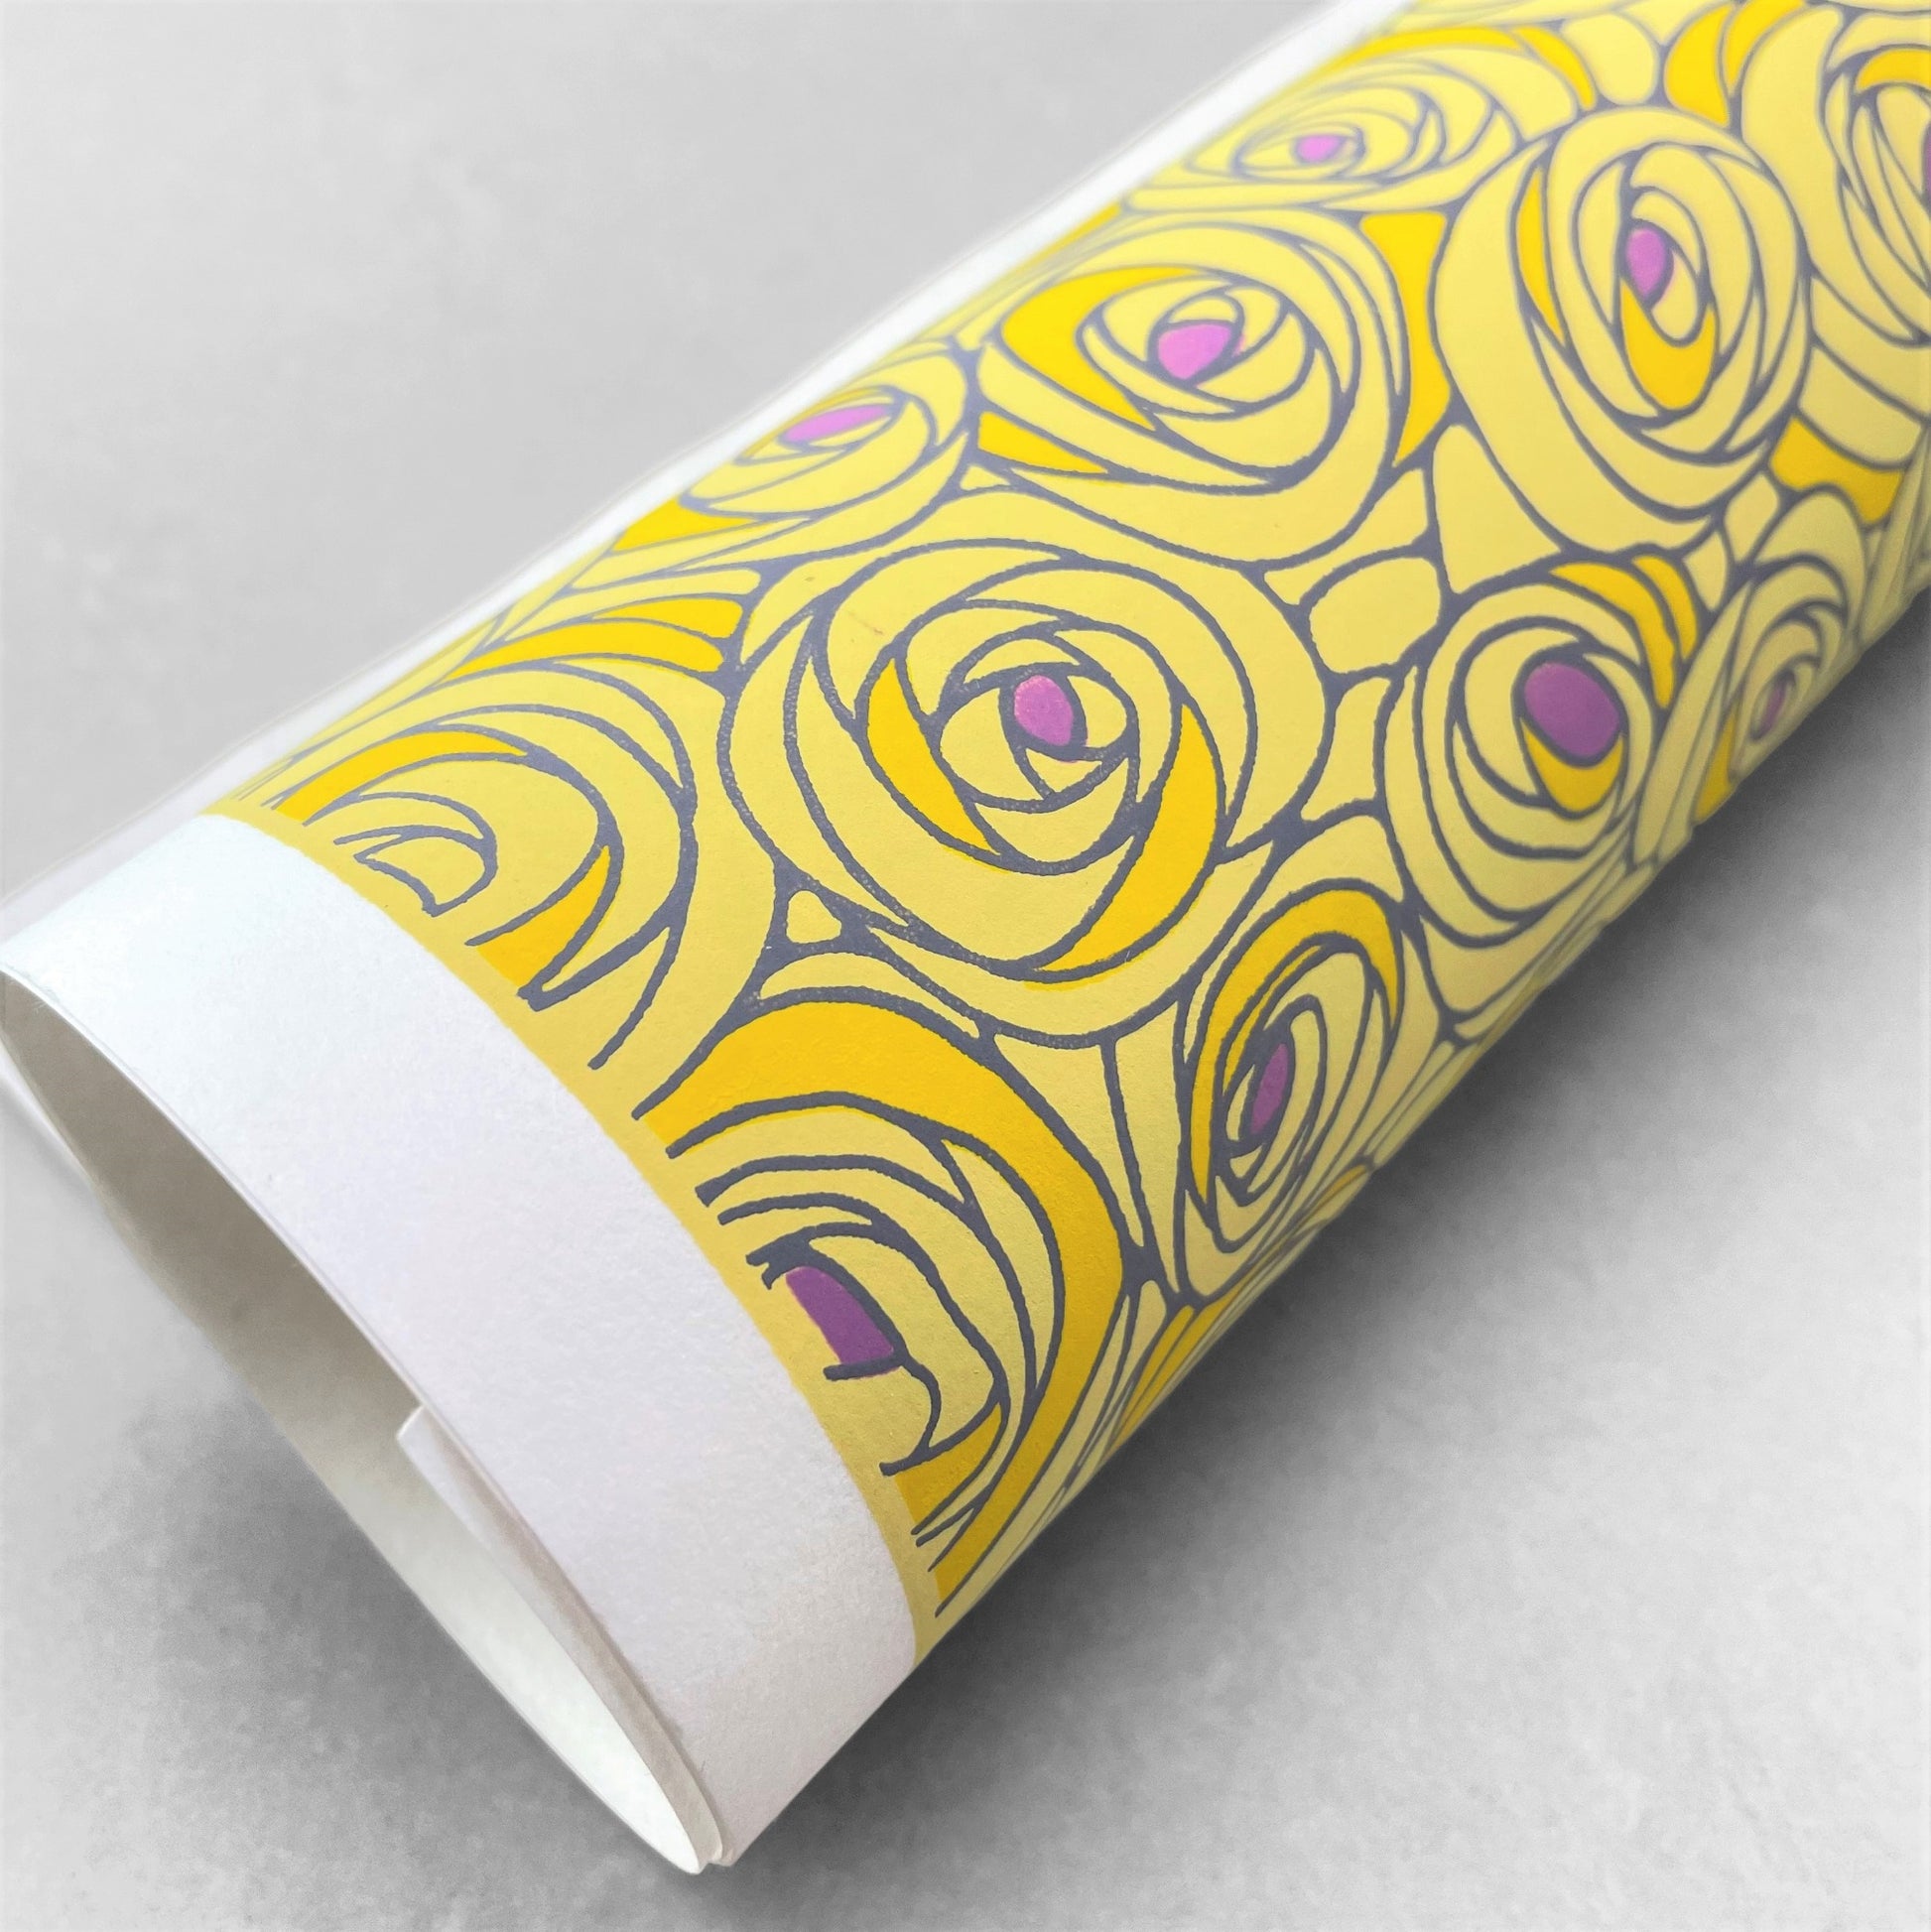 japanese silk-screen handmade paper, chiyogami, showing yellow and lilac abstract floral pattern